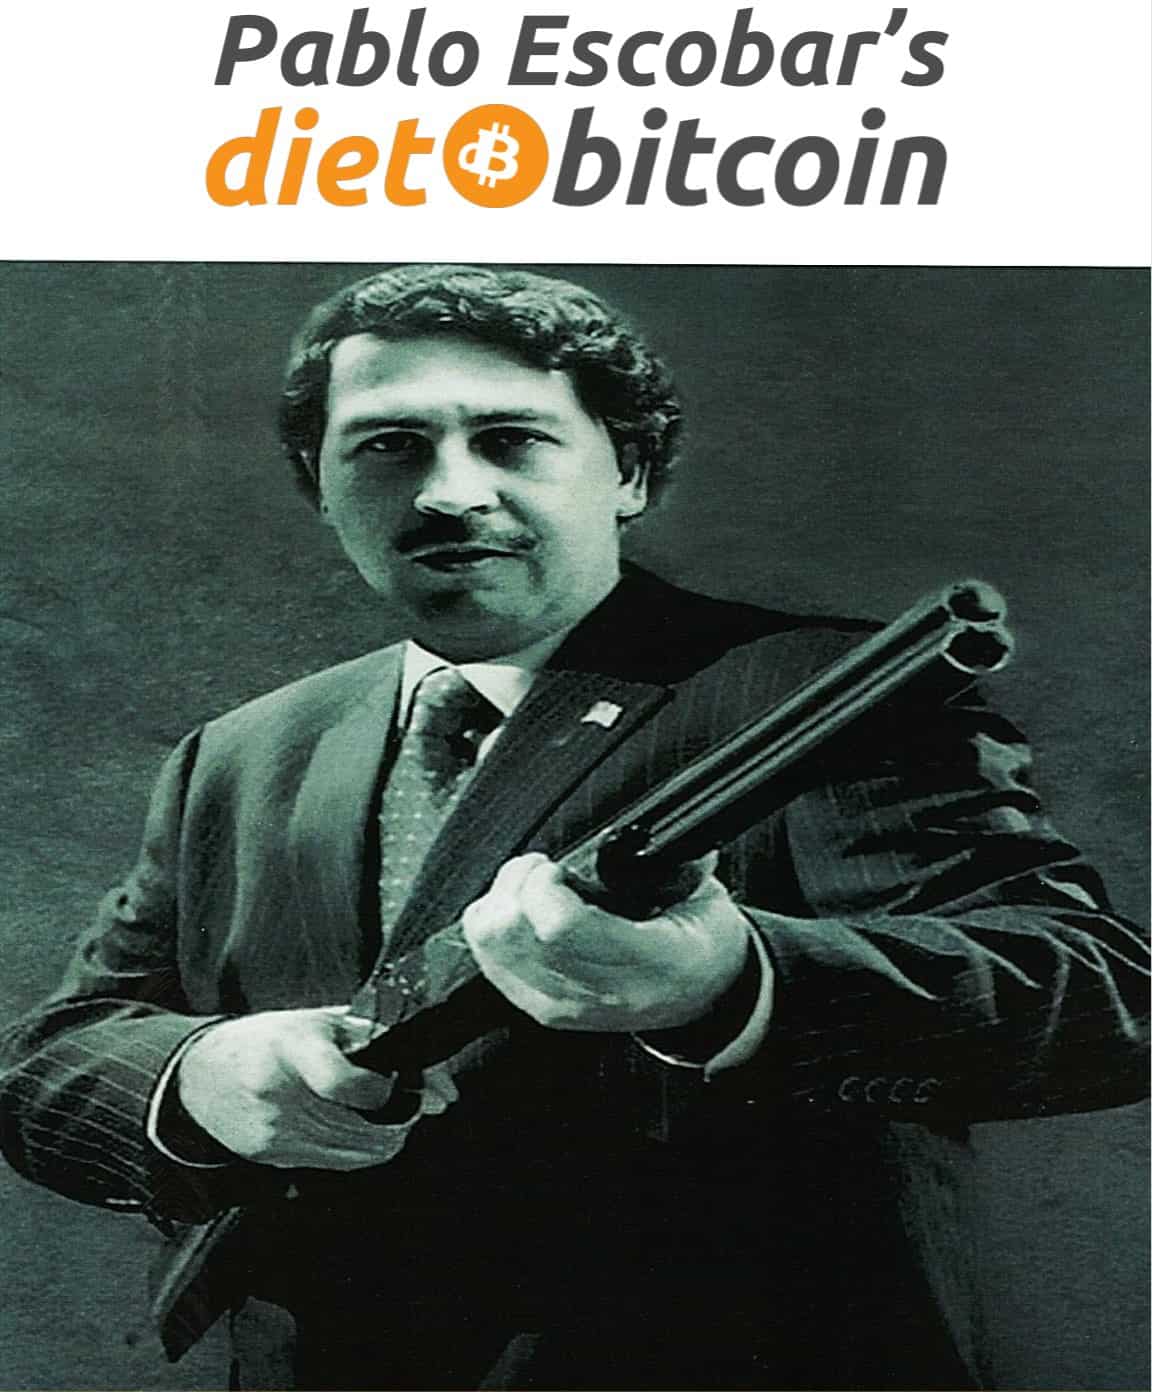 A Purported Crypto-product Named “dietbitcoin” Is Now - Pablo Escobar , HD Wallpaper & Backgrounds